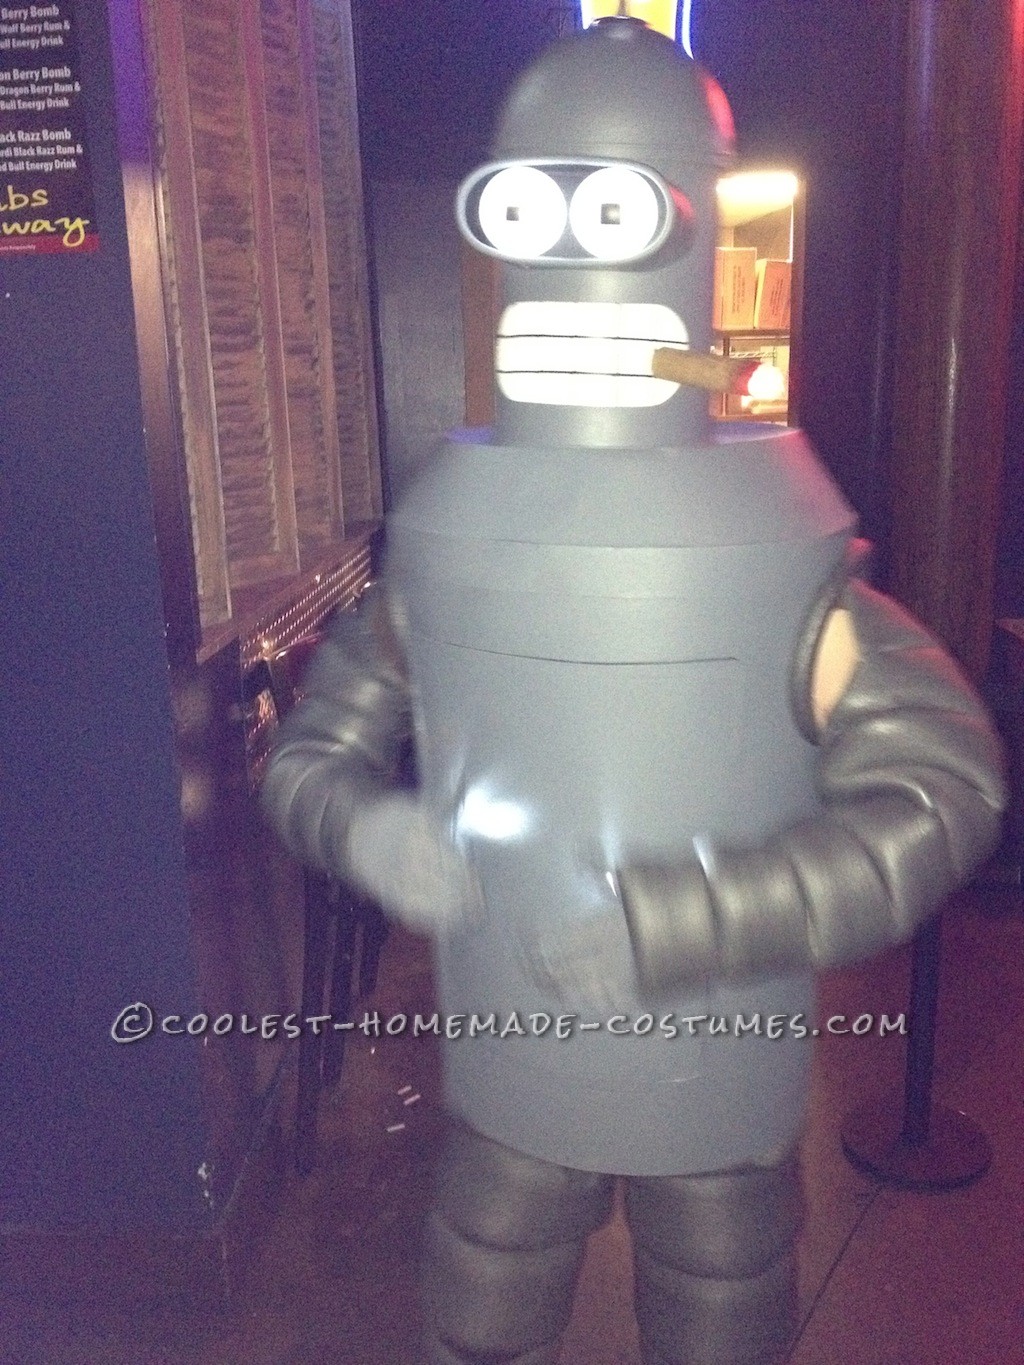 Bender from FuturamaI spent two, make that 2 months, hundreds of hours, and over $250 in materials and pieces to make this costume come to life. It i